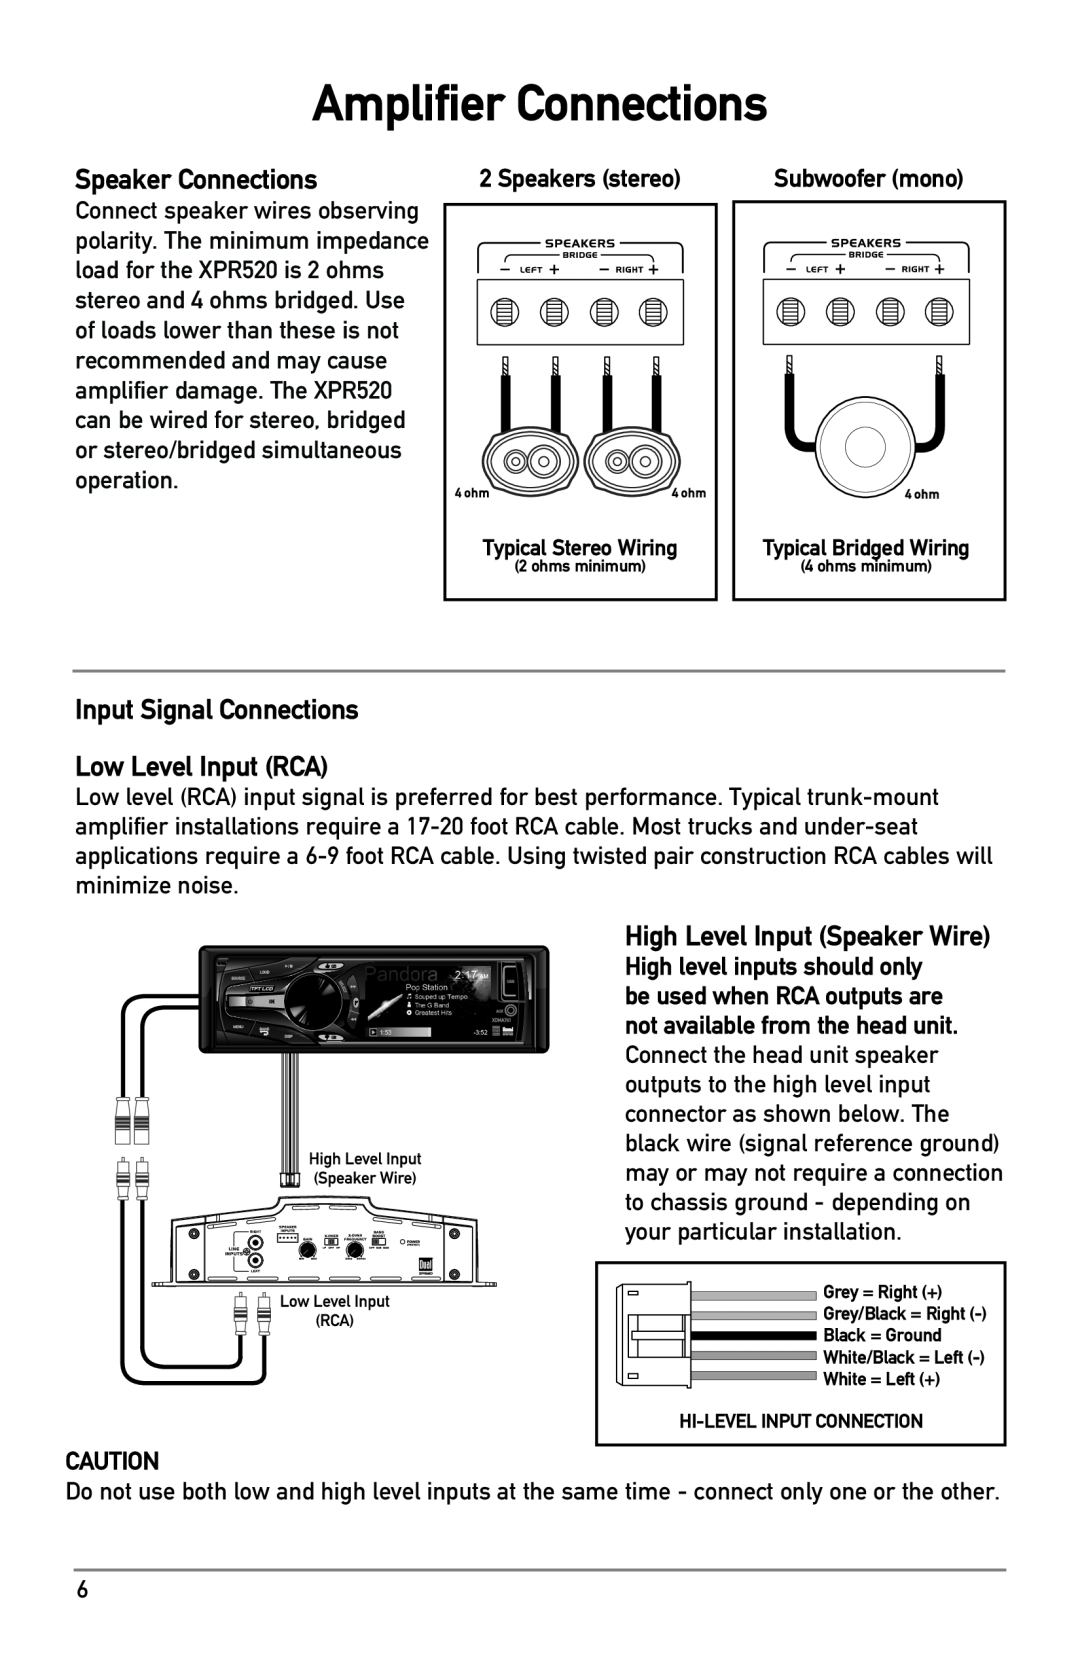 Dual XPR520 Amplifier Connections, Speaker Connections, Input Signal Connections Low Level Input RCA, Speakers stereo 